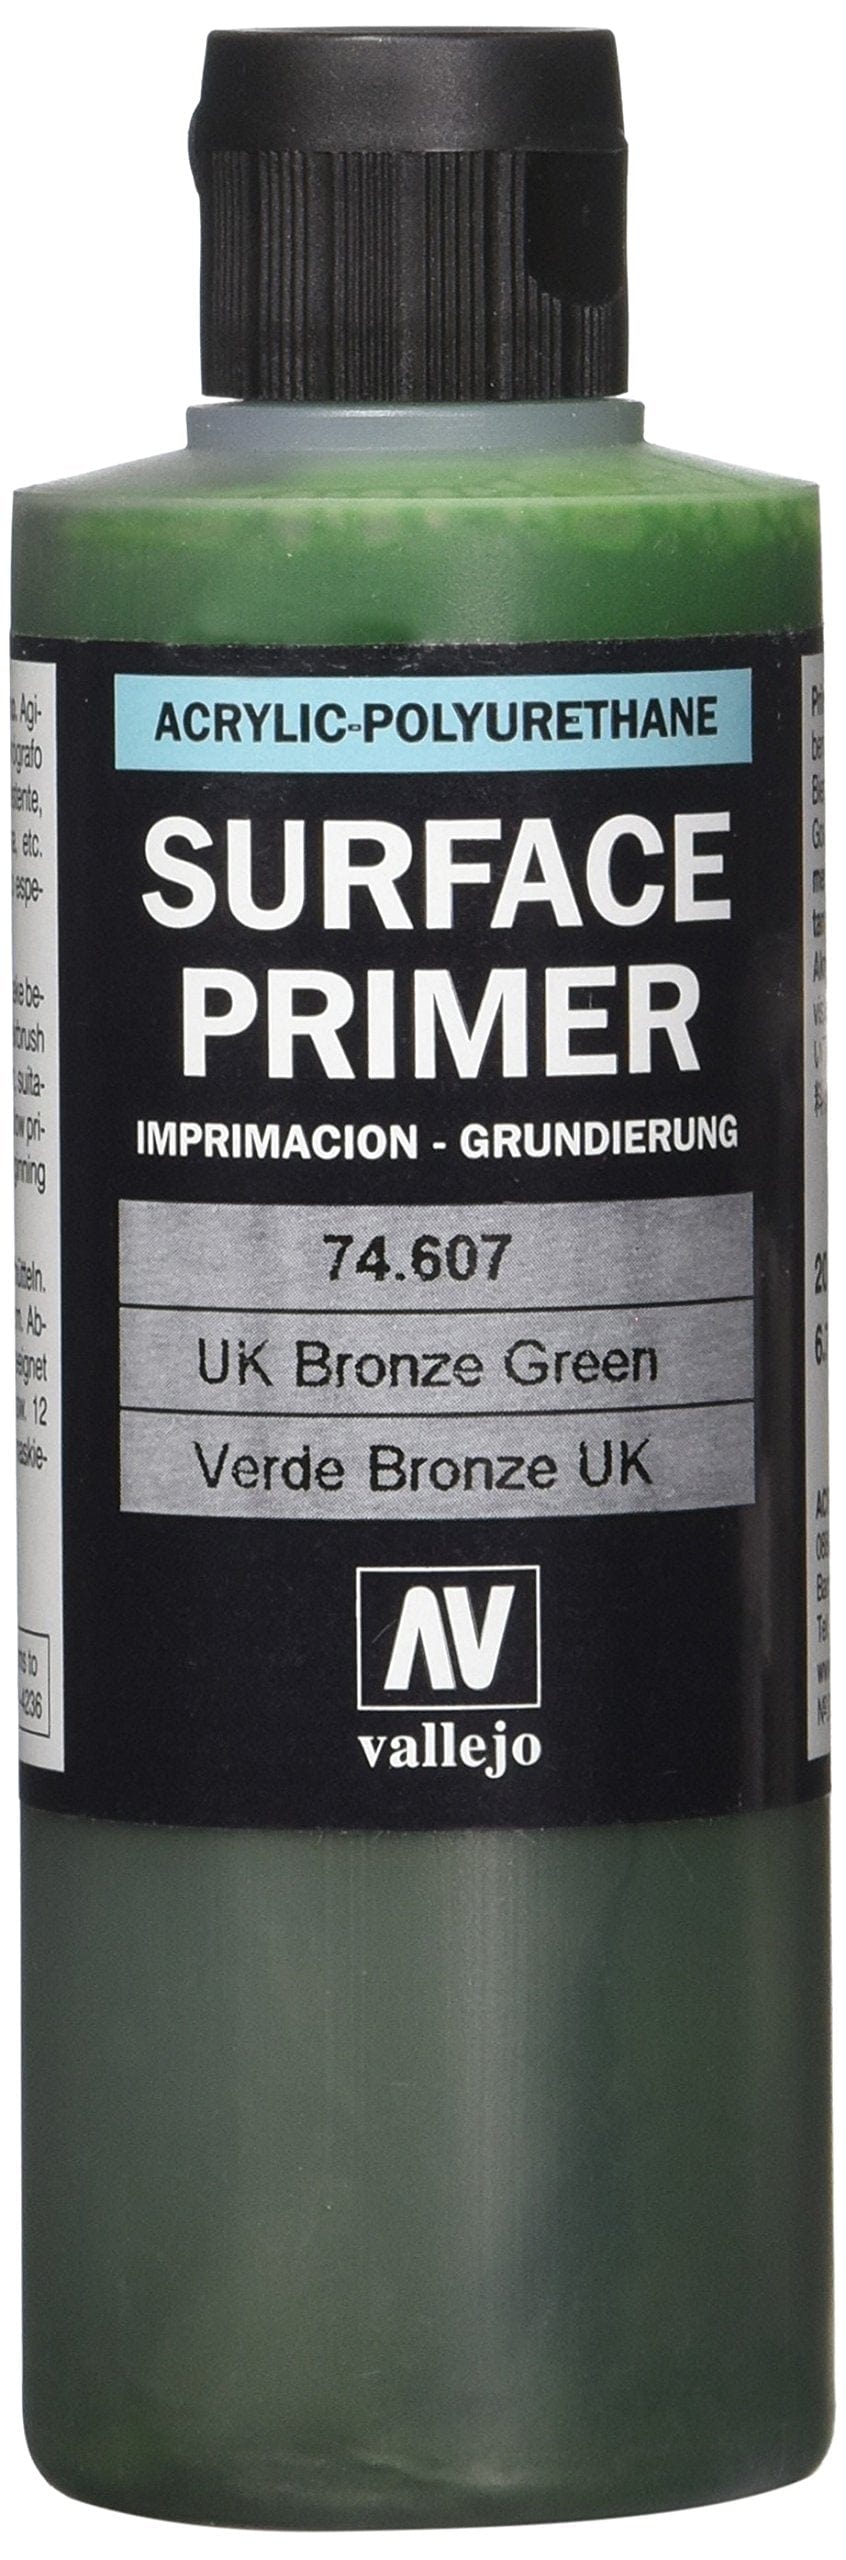 Acrylicos Vallejo, S.L. Accessories Acrylicos Vallejo Auxiliary Products: UK Bronze Green (200ml)